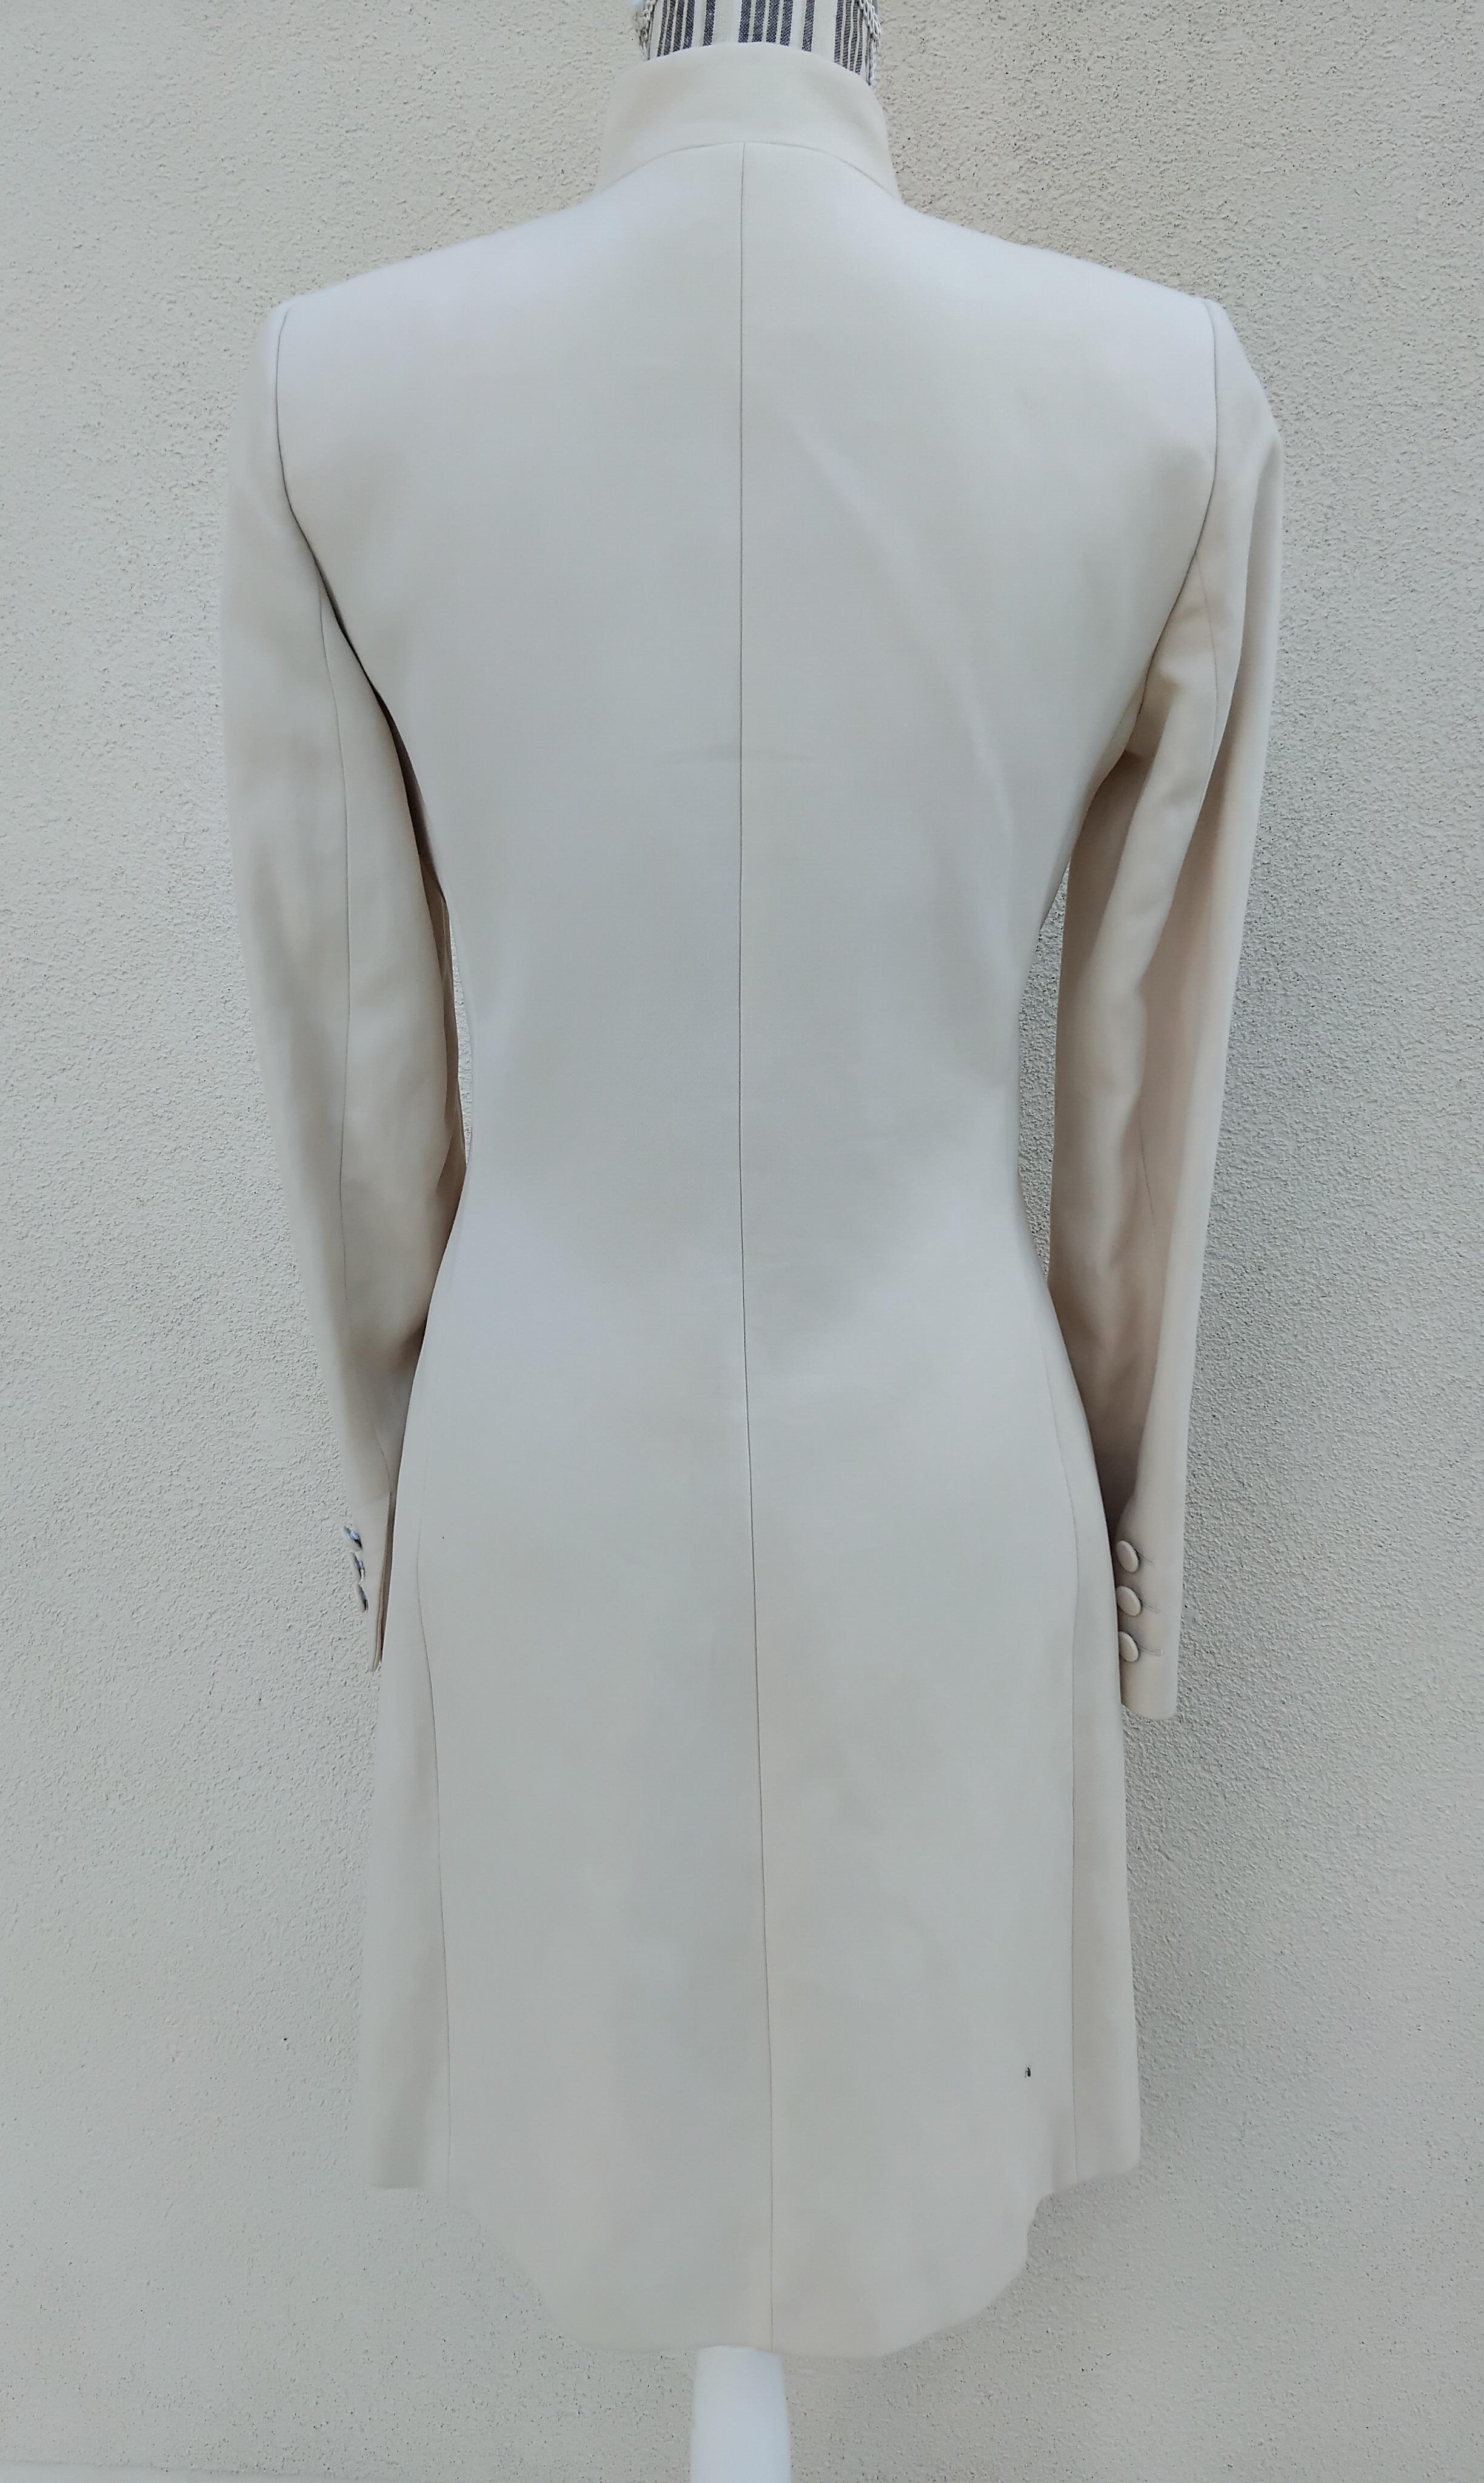 Women's Gorgeous Hermès Spring Coat Ivory Mao Collar Size 36 FR 2-4 US For Sale